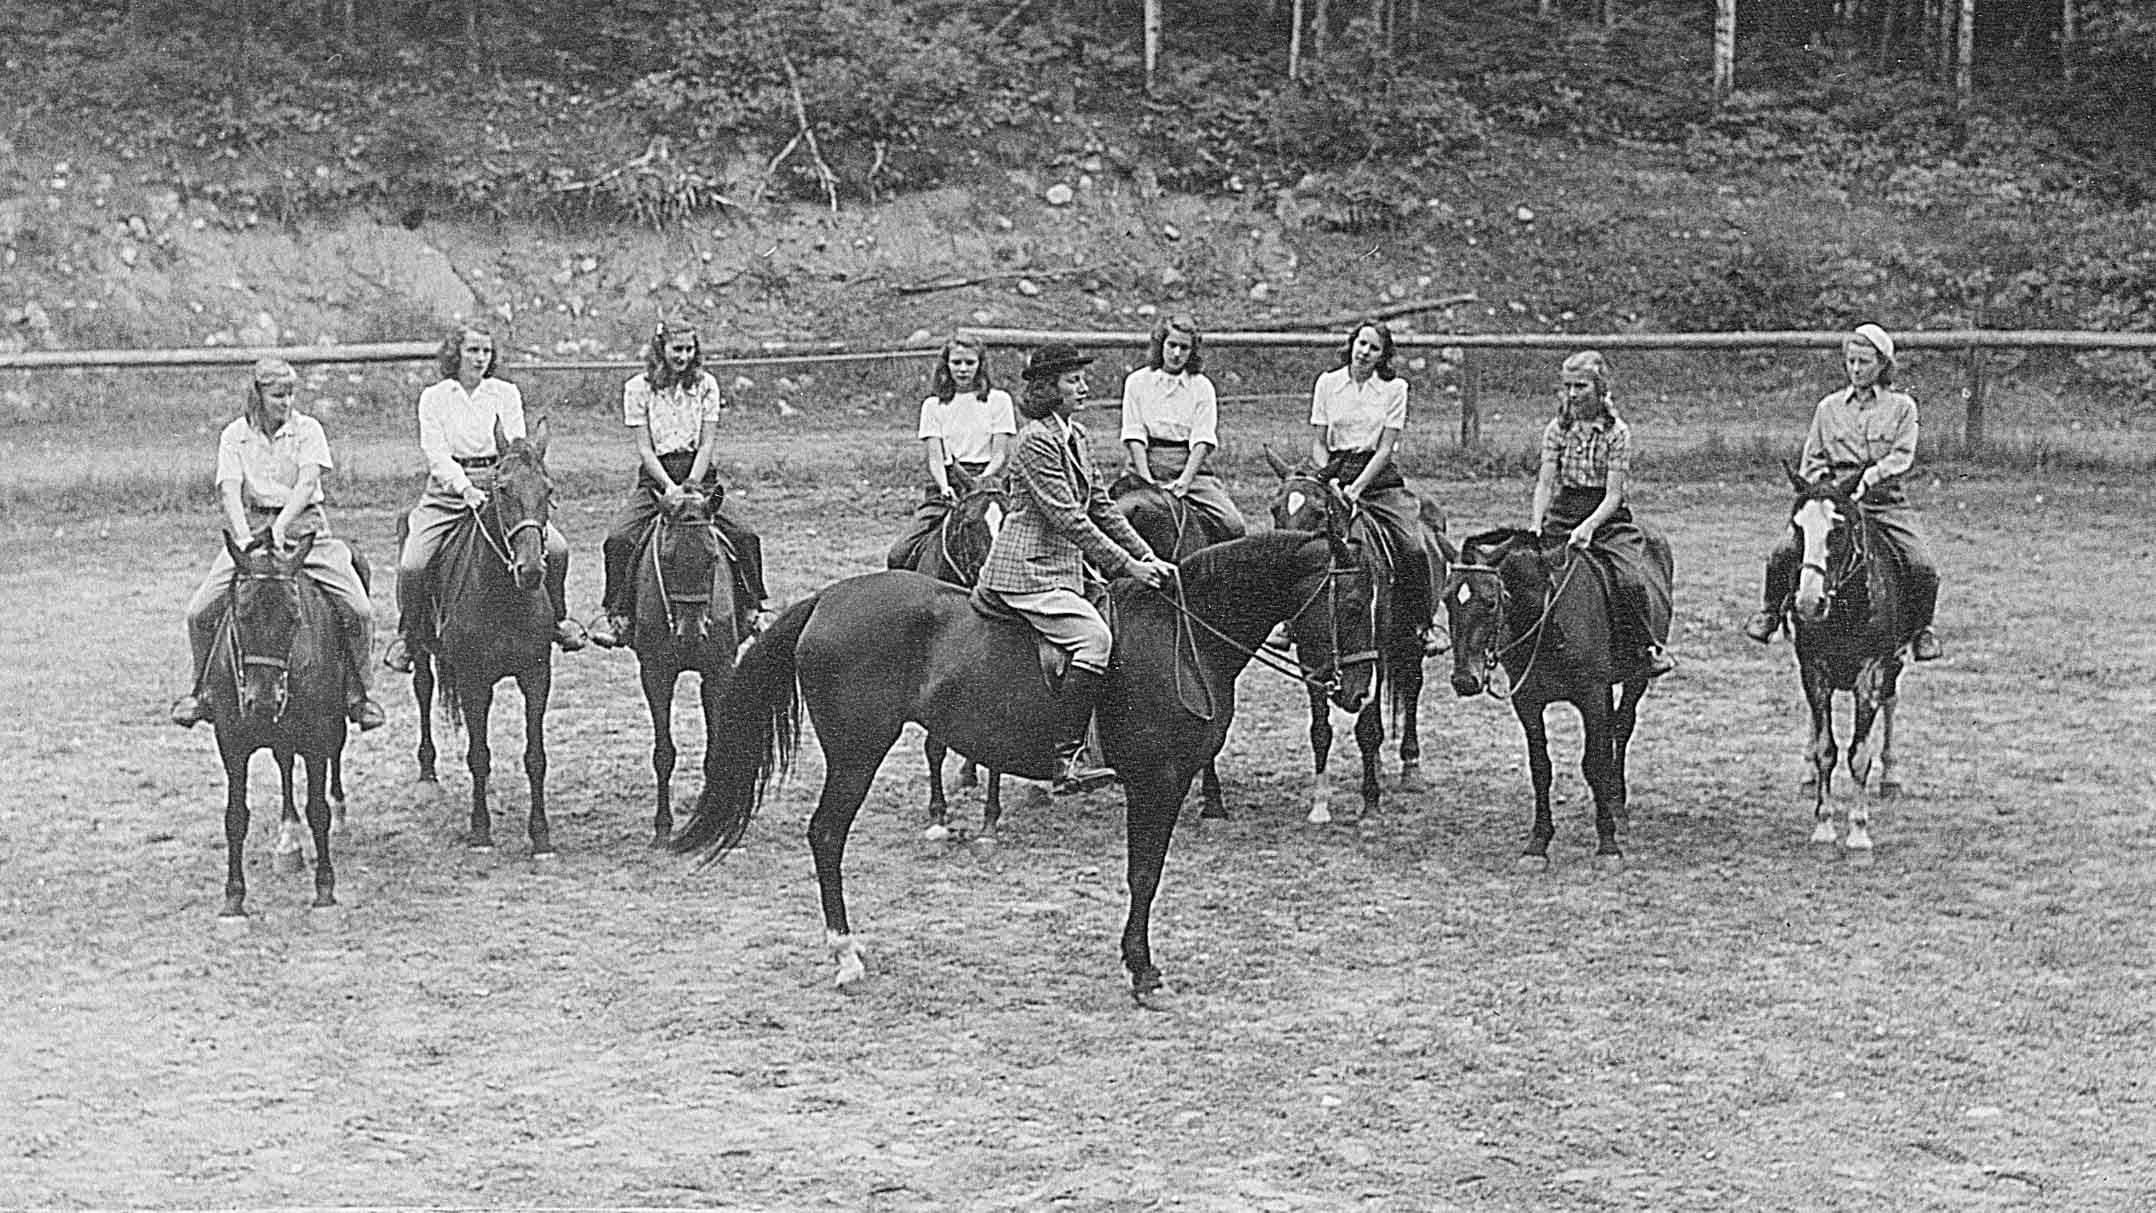 1946 photo of campers riding horses